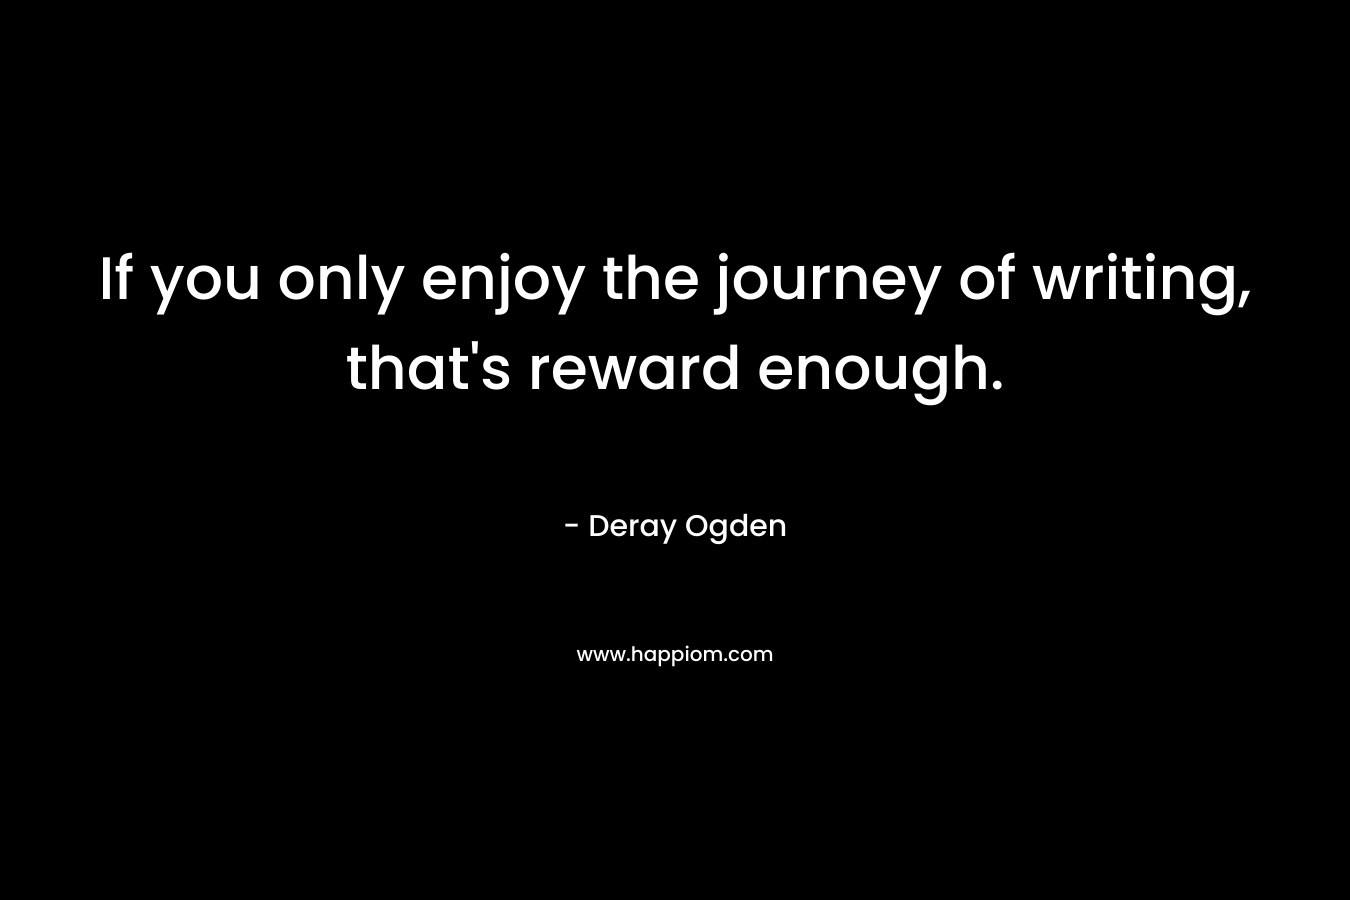 If you only enjoy the journey of writing, that's reward enough.